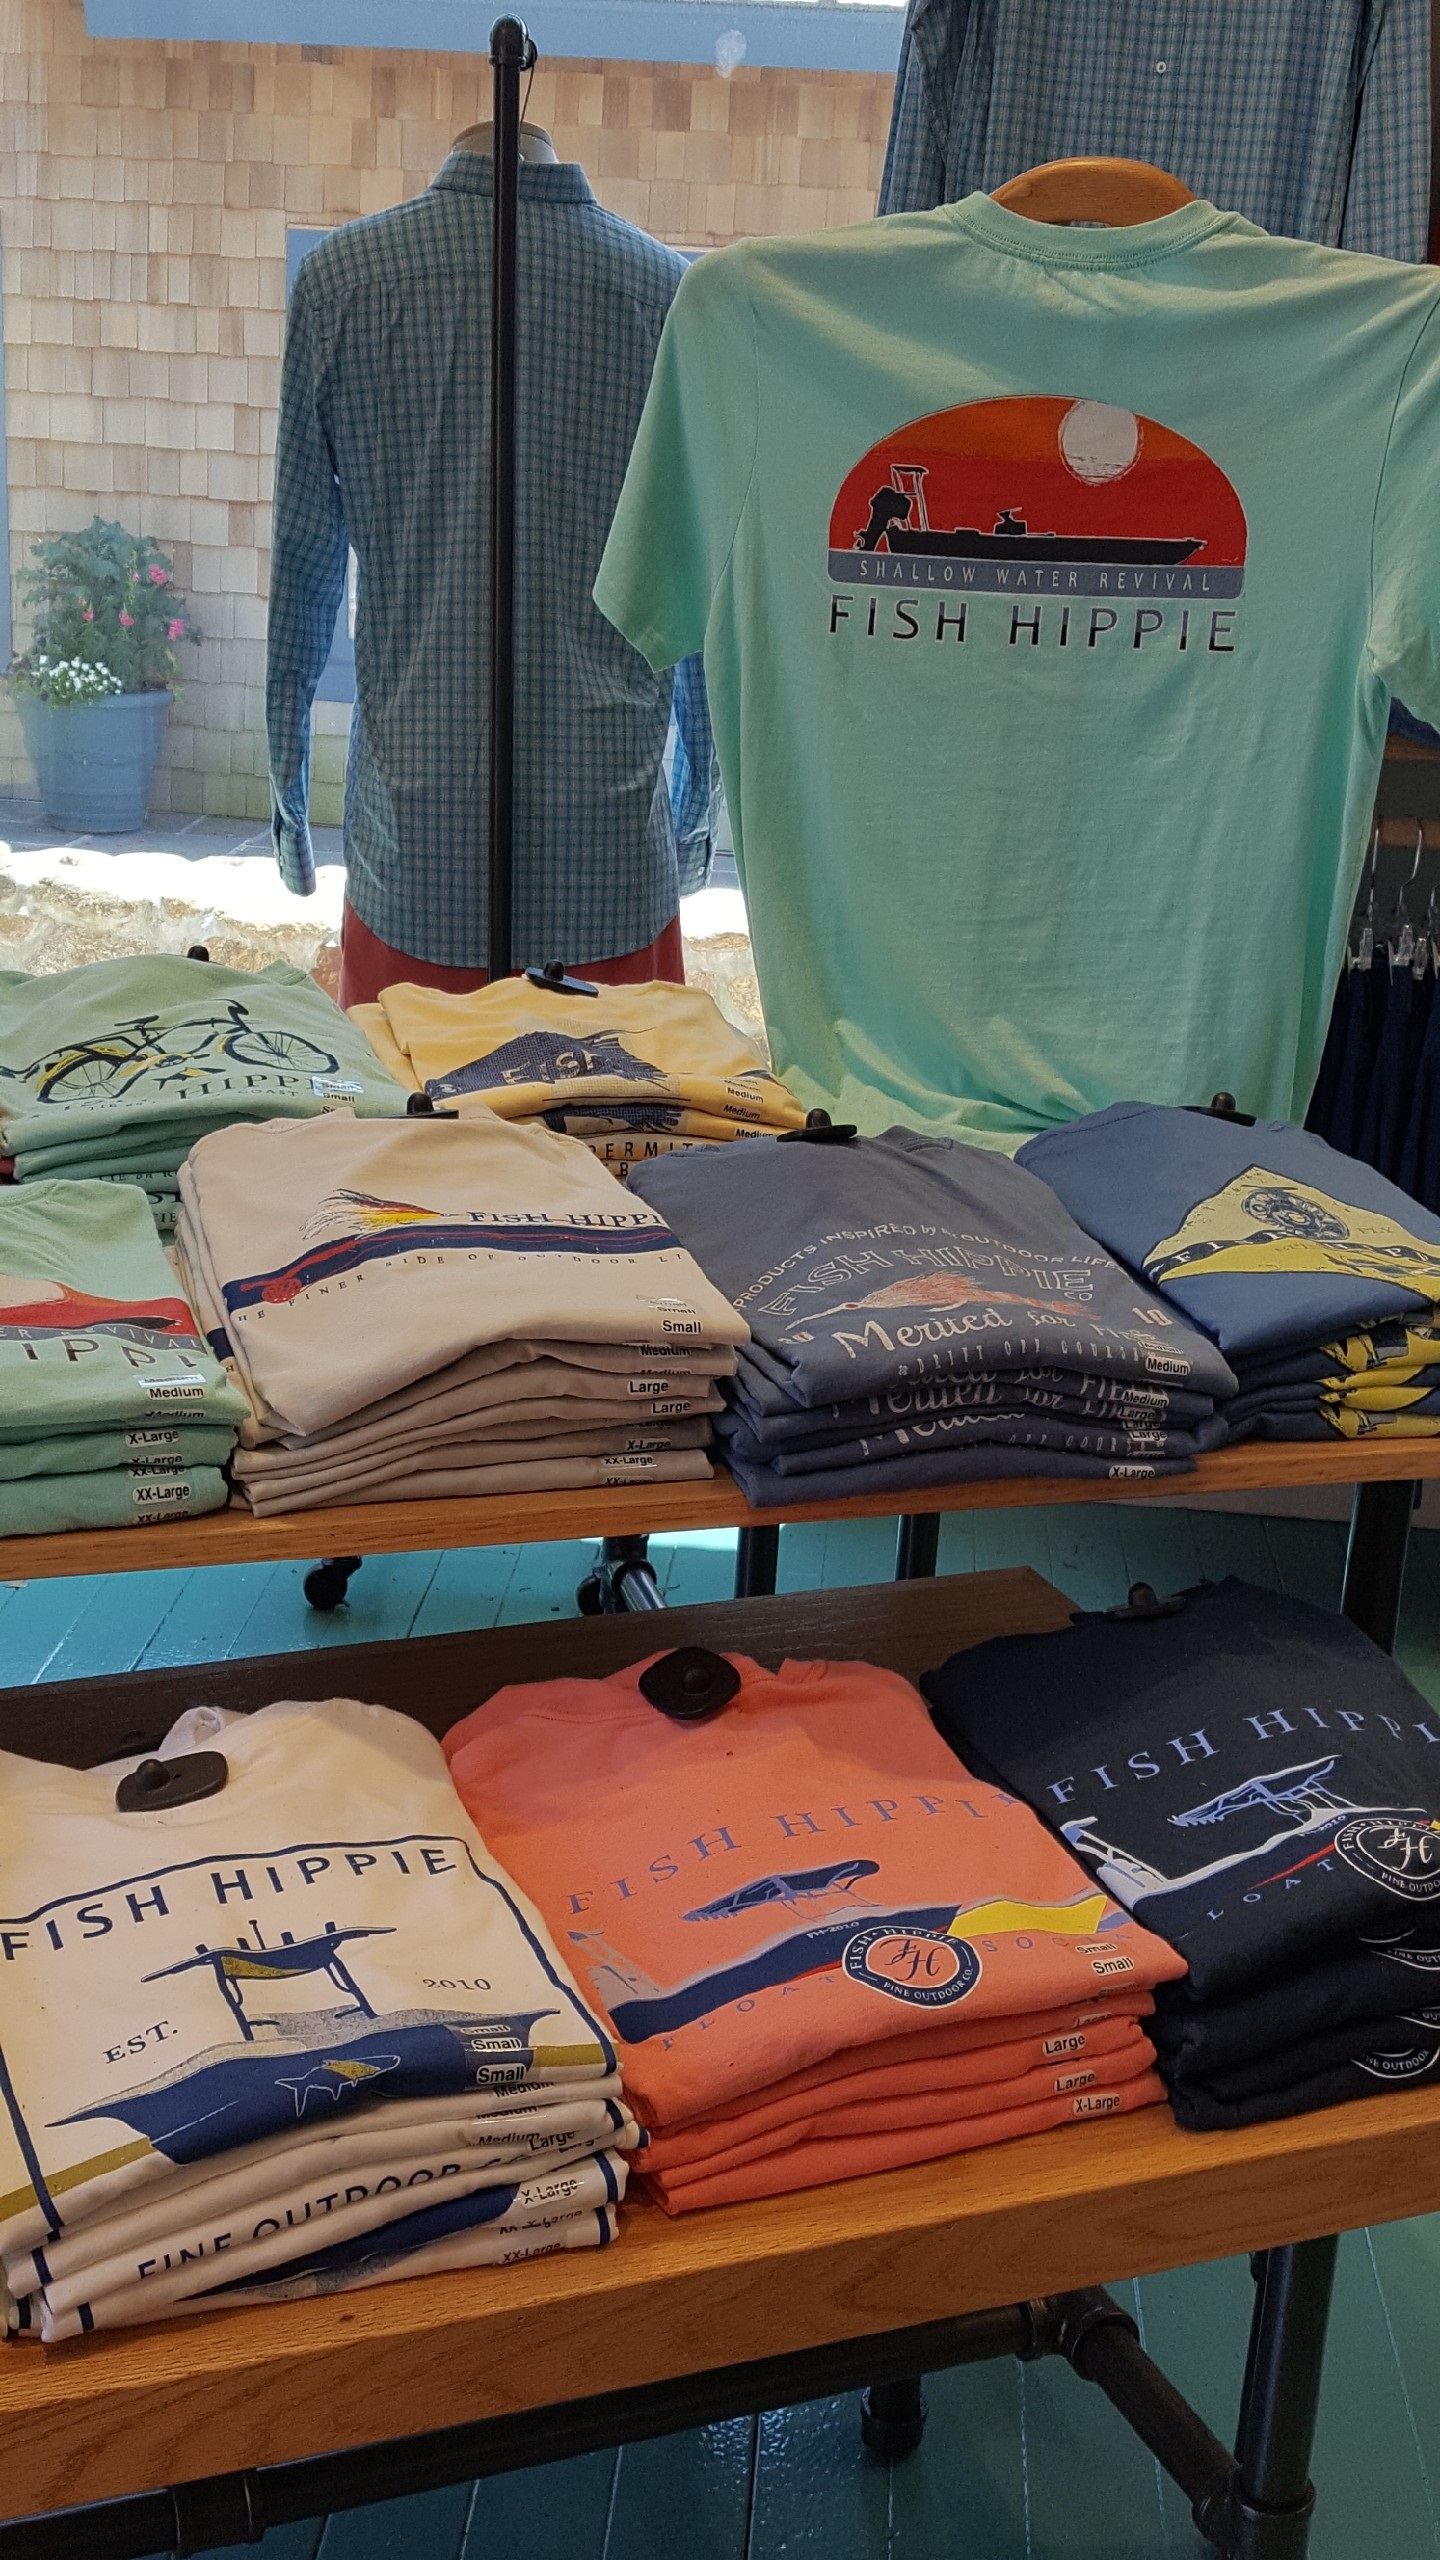 Whether You're A Fisherman Or Just A Fish Hippie, You'll Be Hooked on Pure  Lure at Barefoot Landing